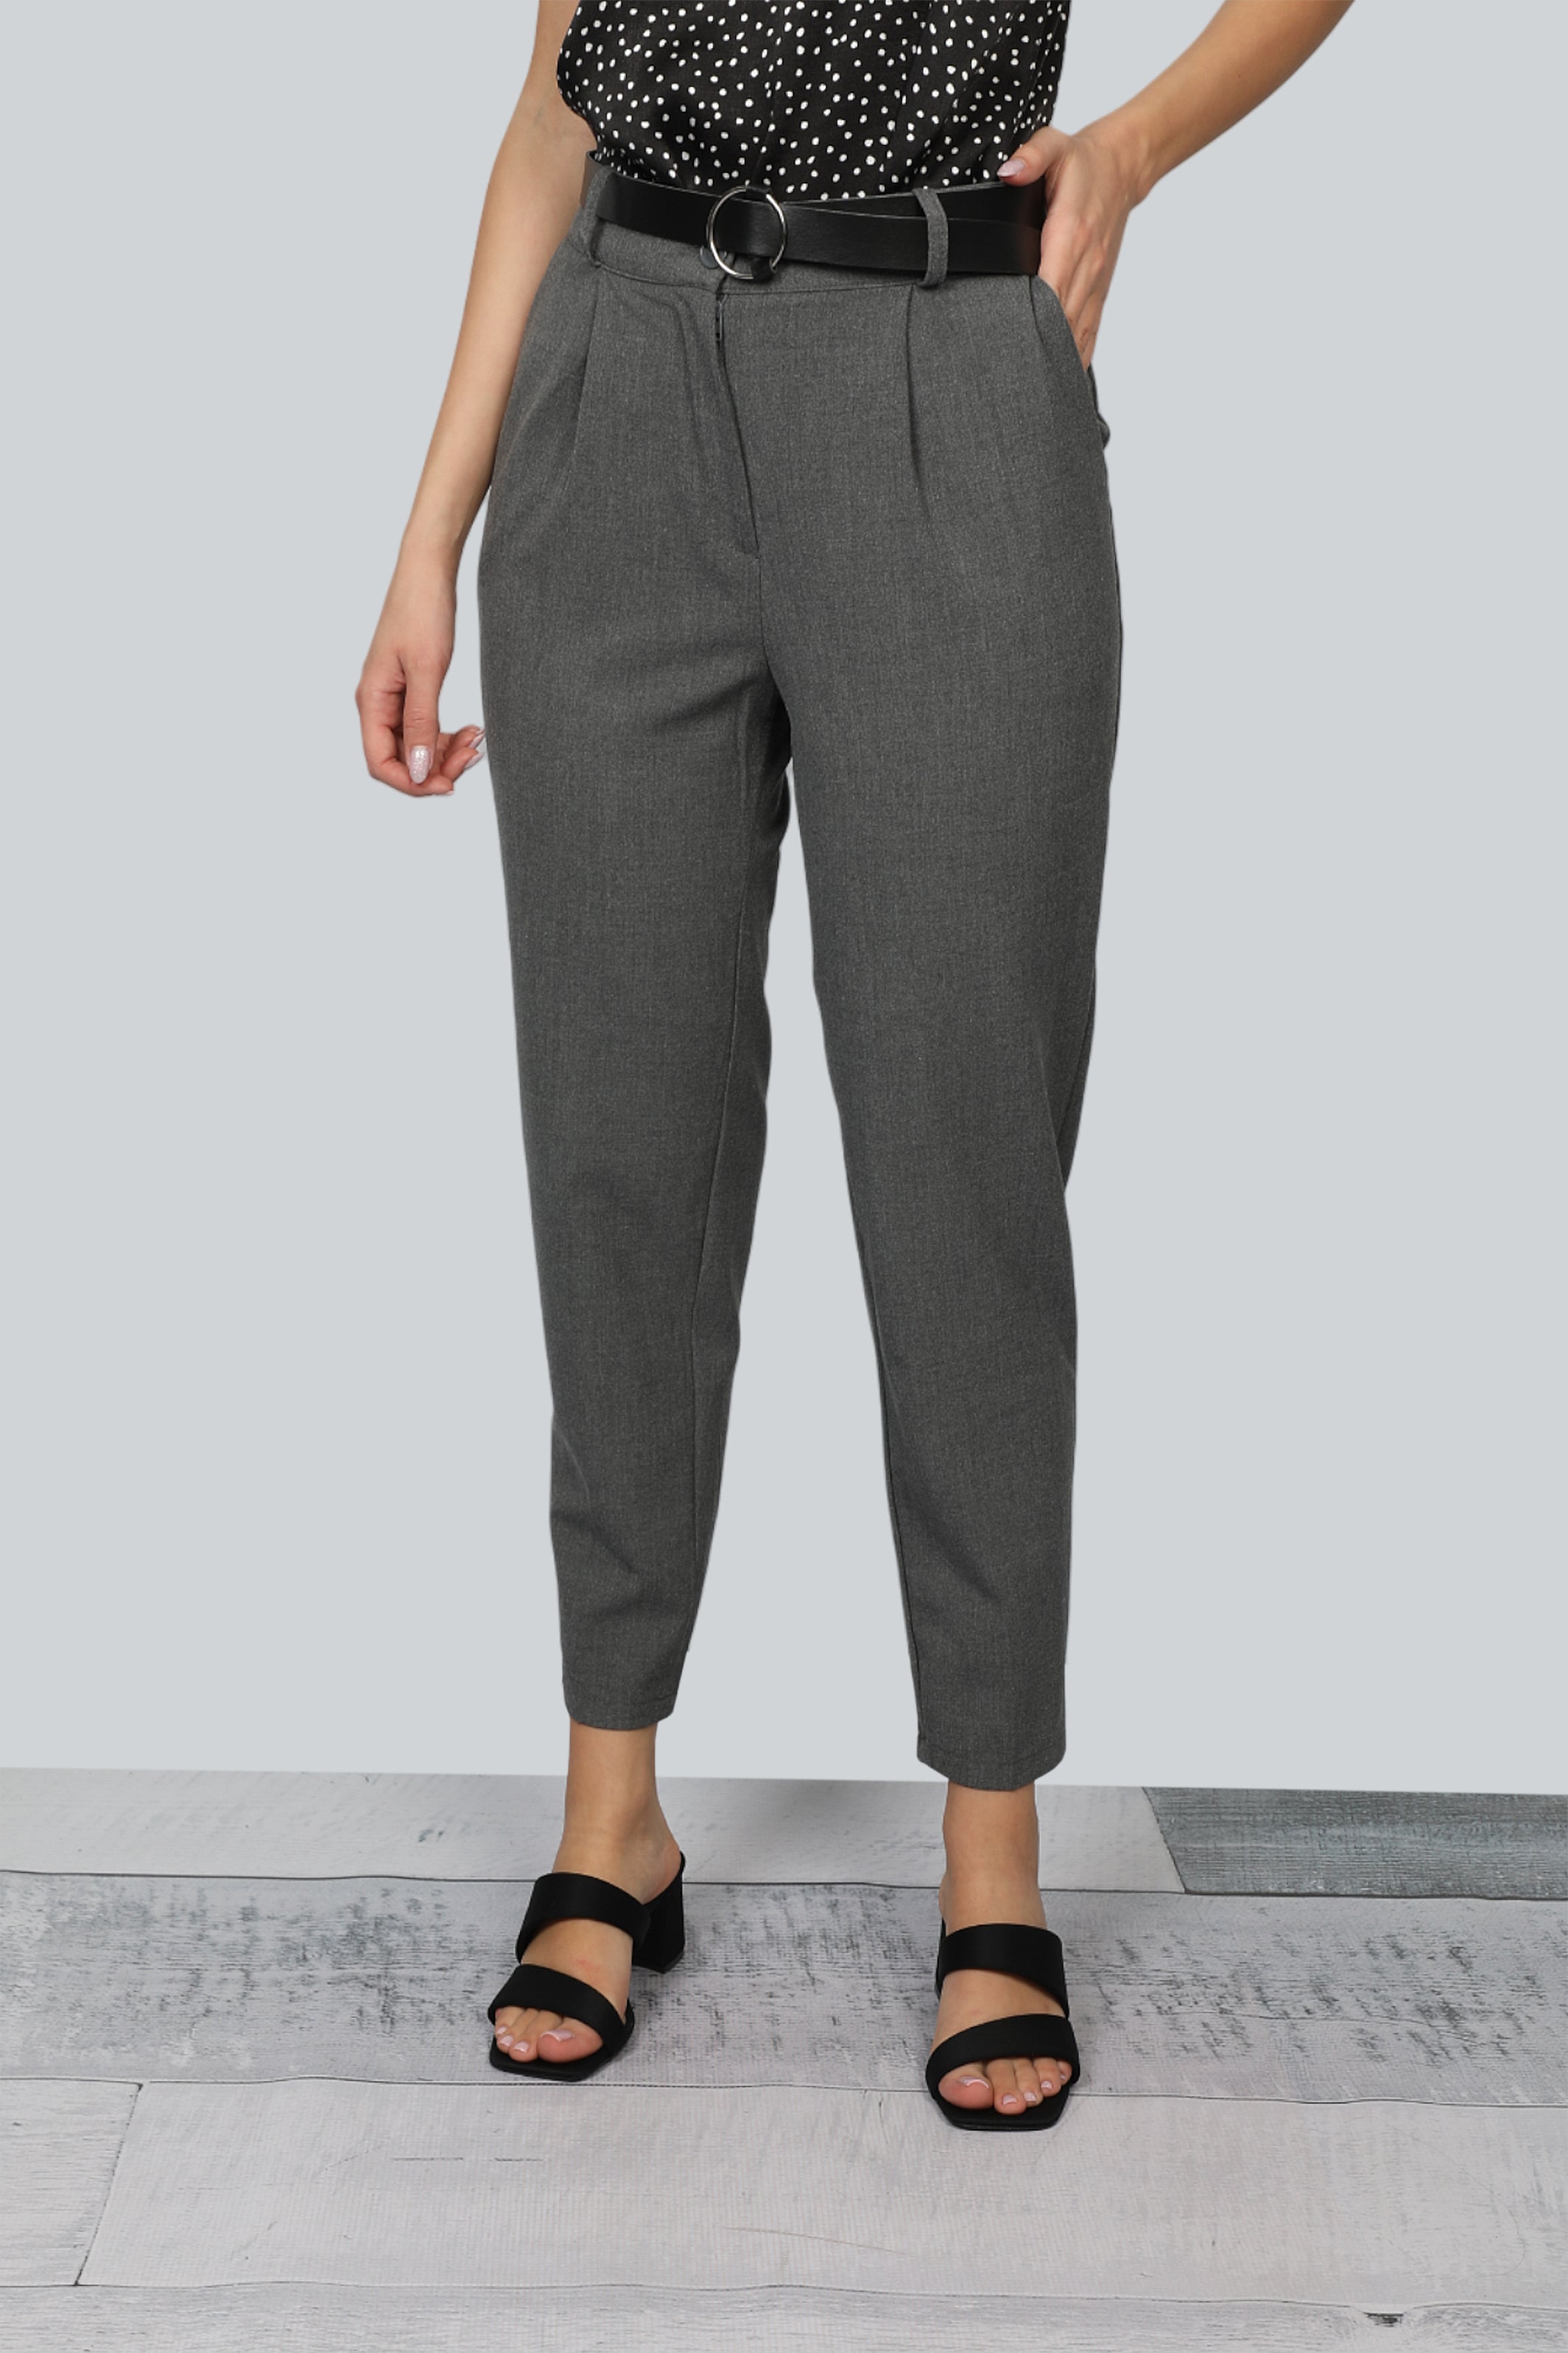 Grey Sport Chic Pants Belted